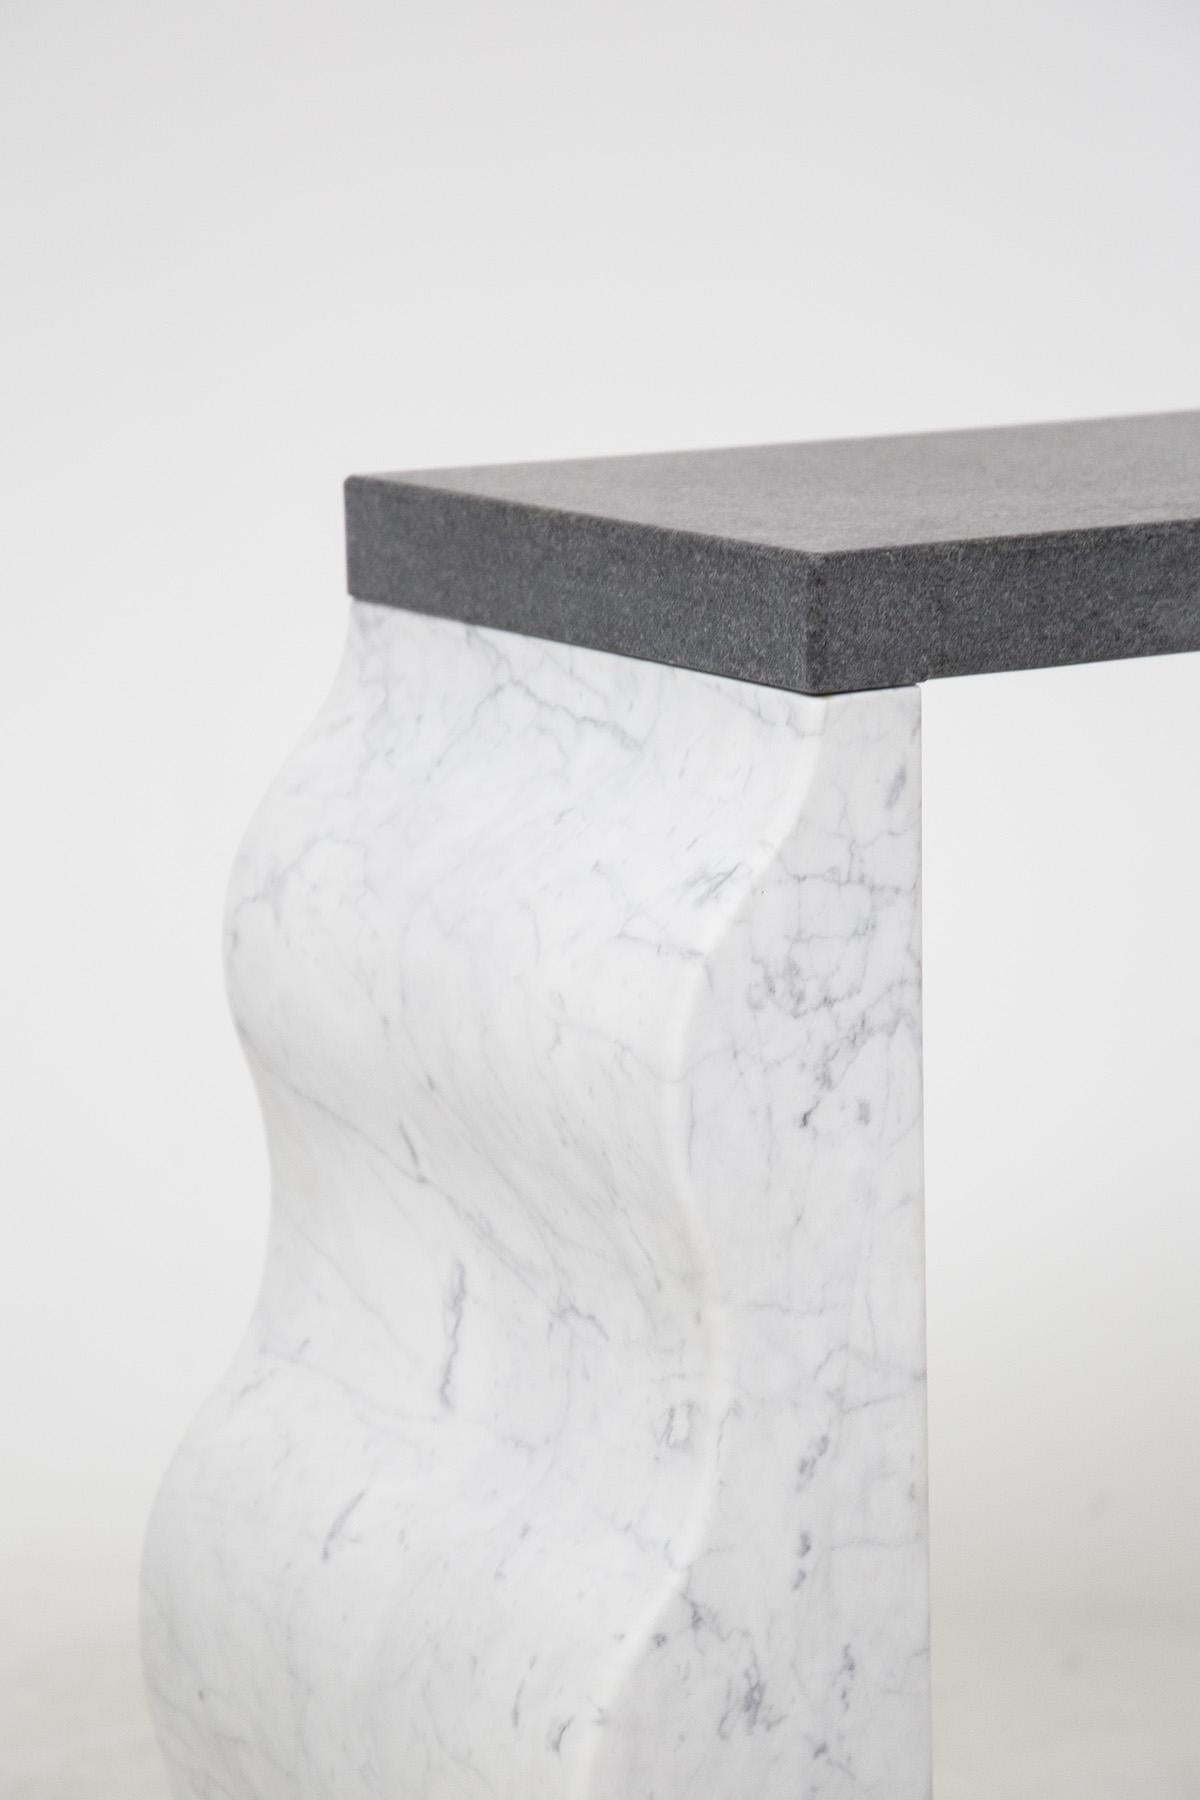 Ettore Sottsass Consolle in White and Black Marble Montenegro 2